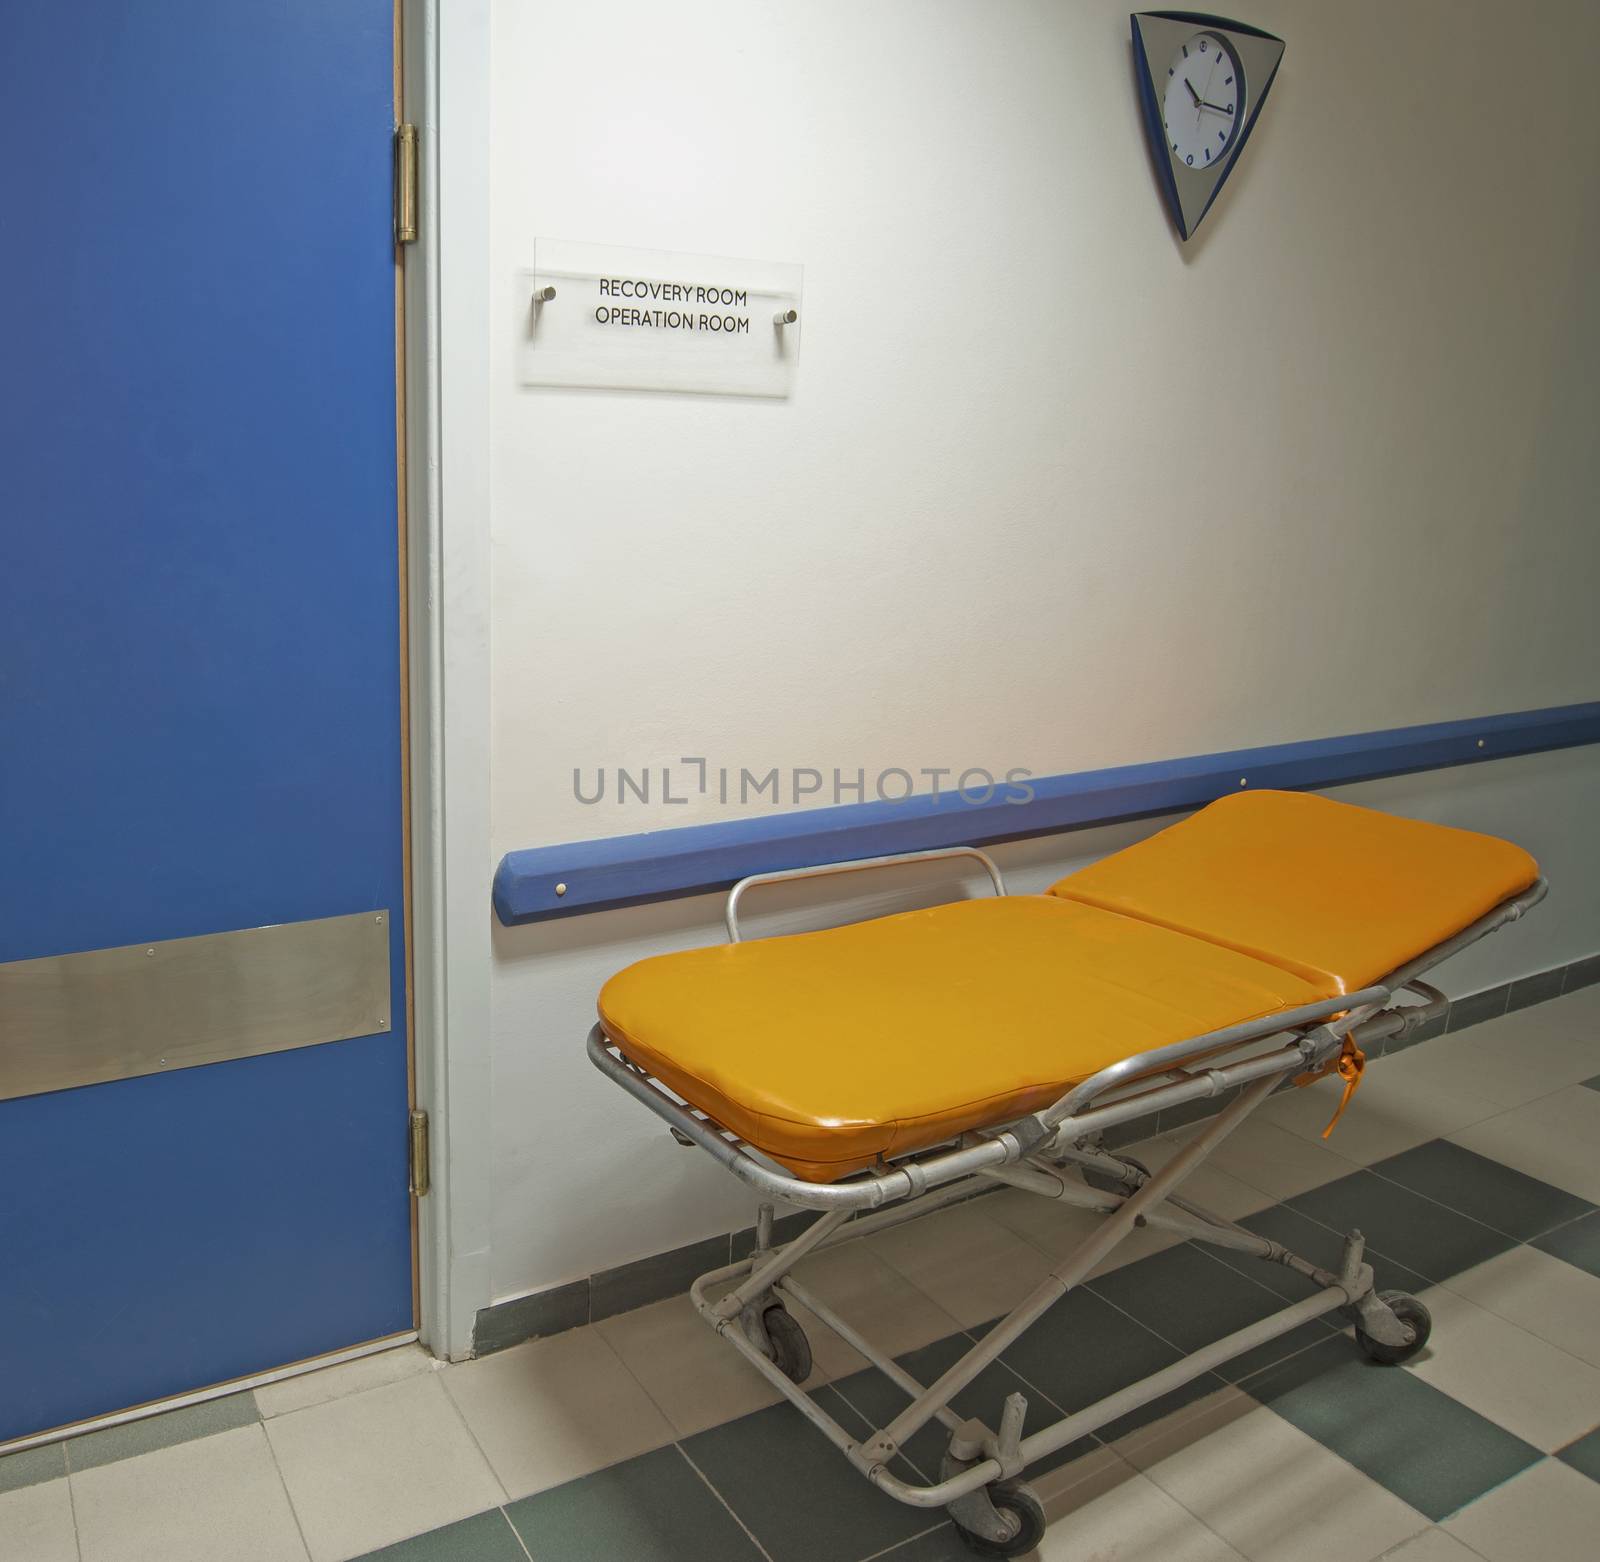 Medical trolley outside an operating room by paulvinten